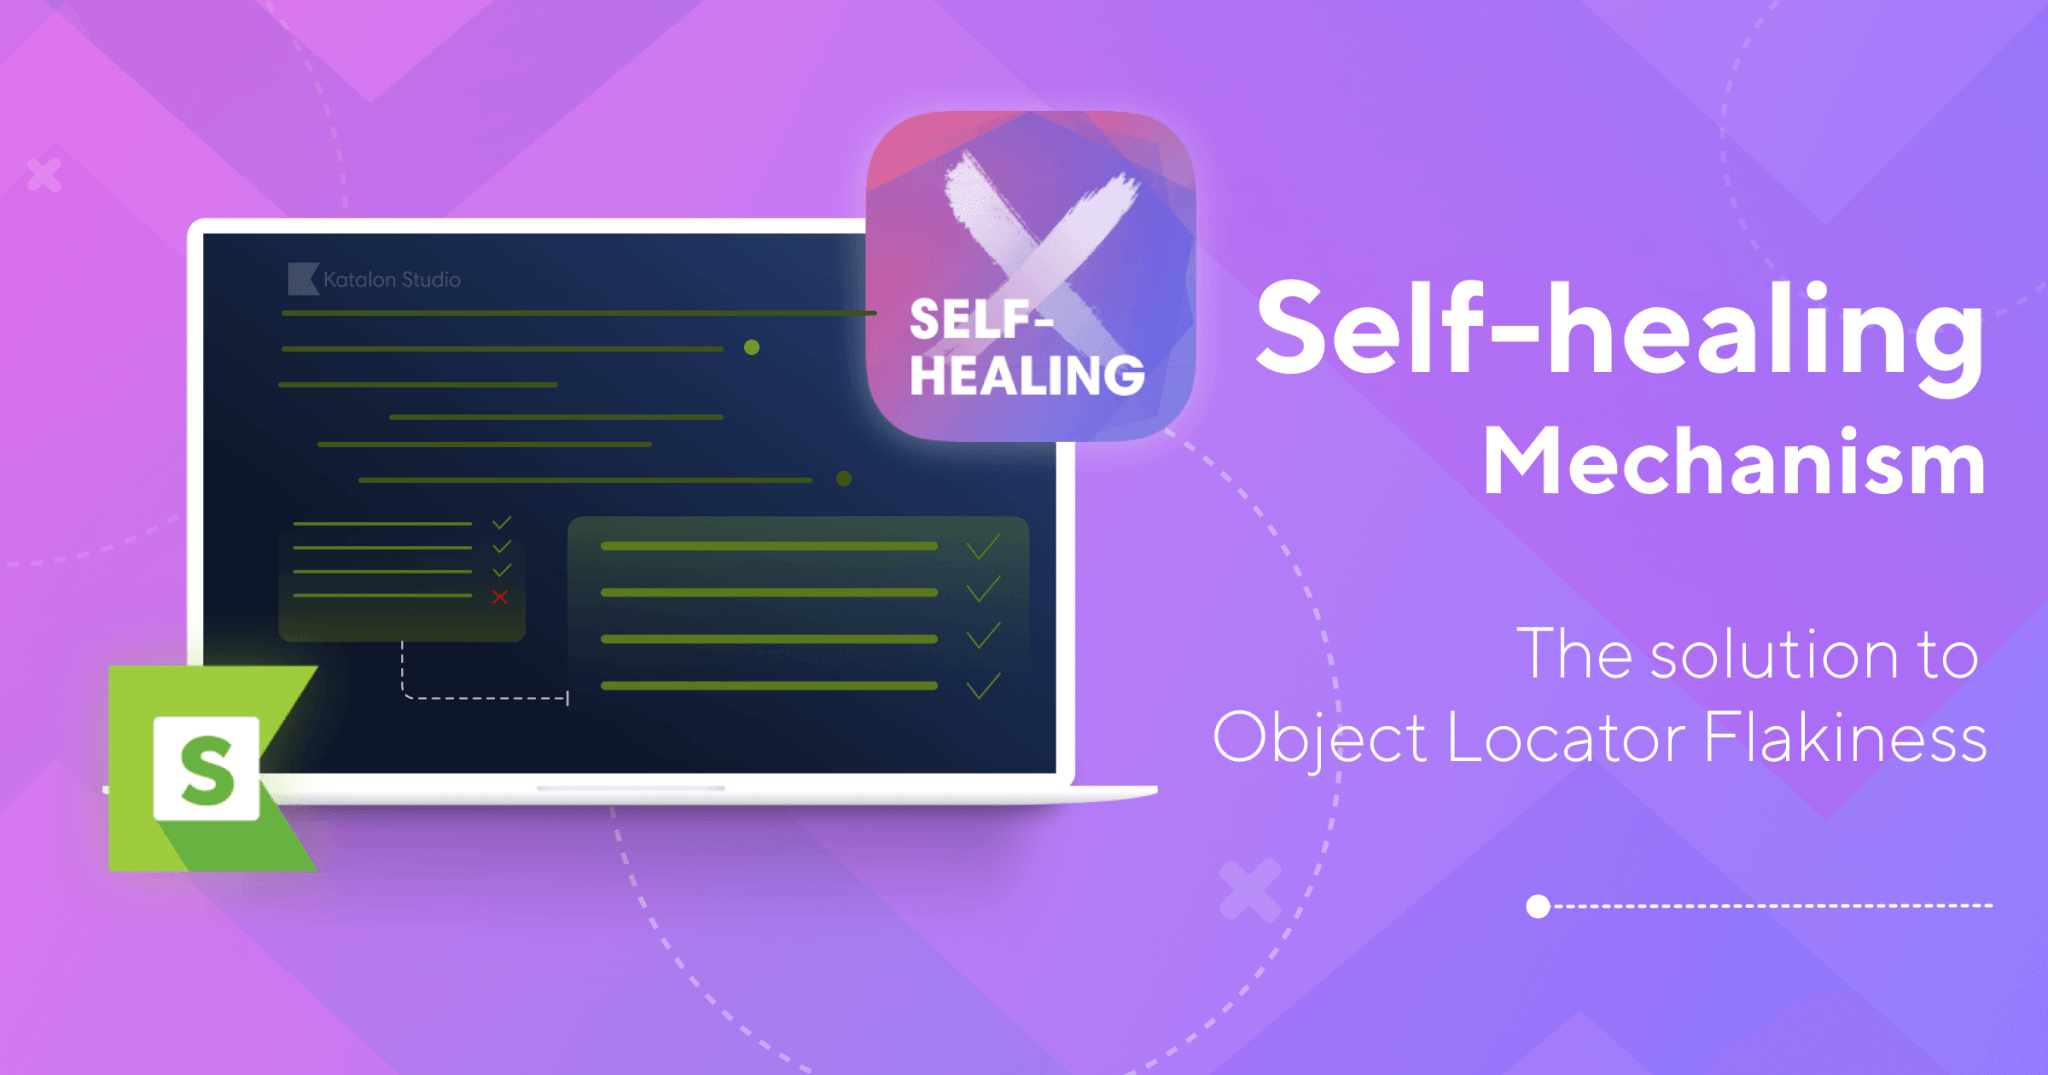 Eliminate Object Locator Flakiness with Katalon’s New Self-healing Feature